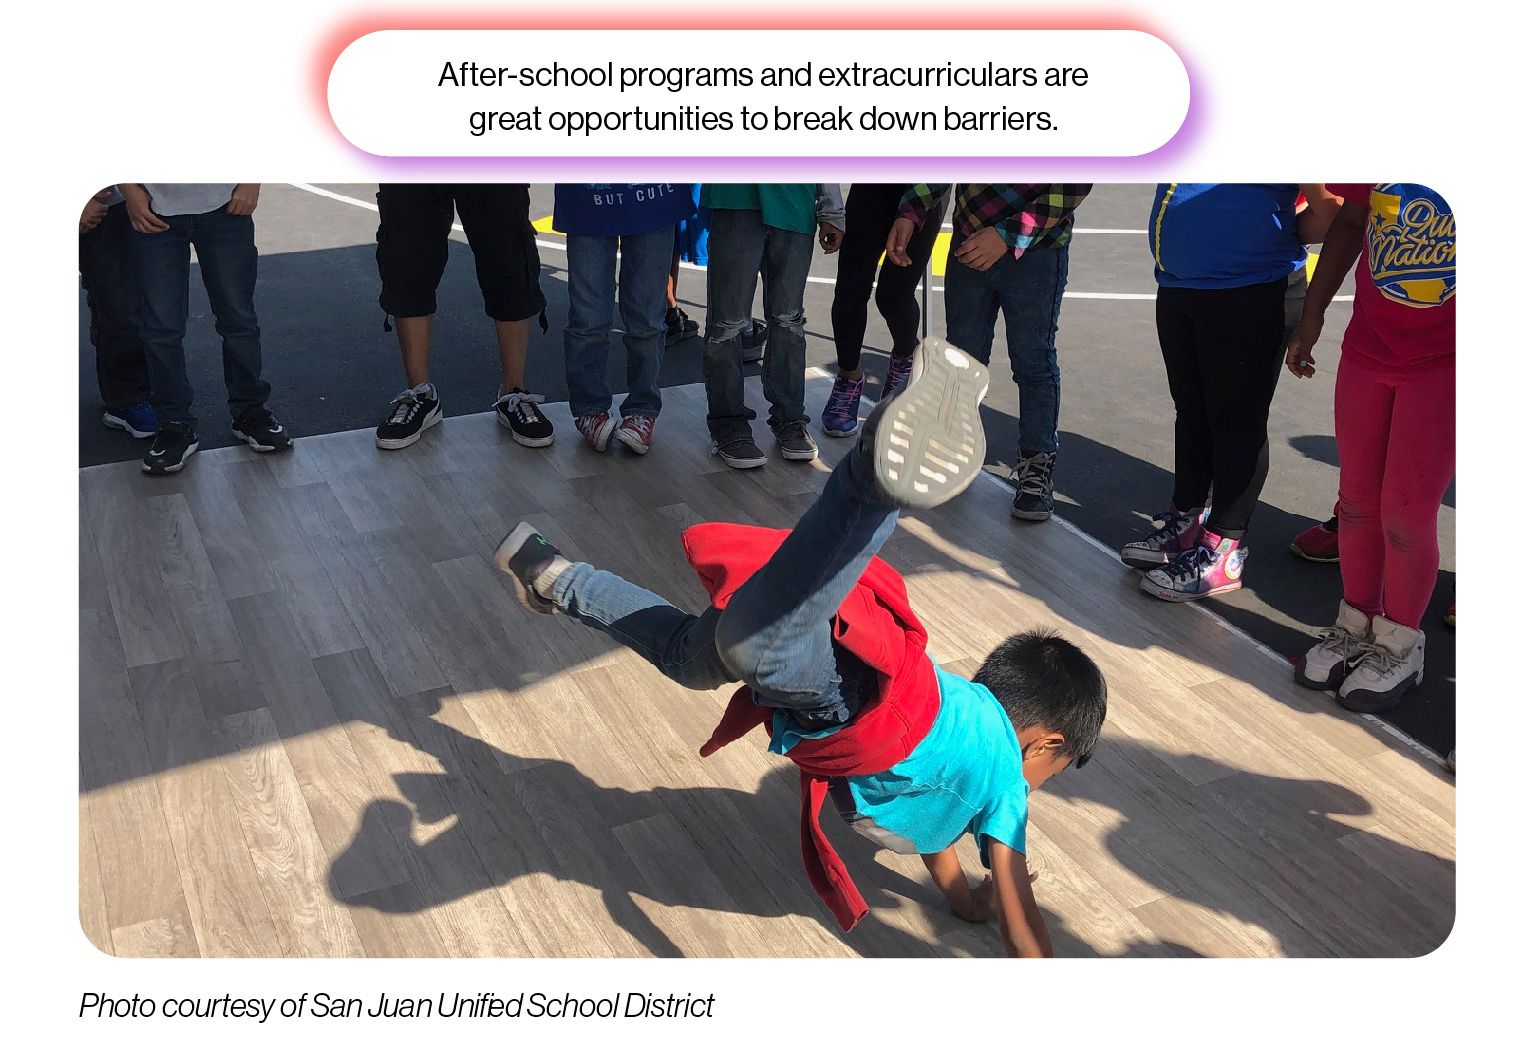 Image: A young student dancing with friends, with the SchoolCEO caption 'After-school programs and extracurriculars are great opportunities to break down barriers.'